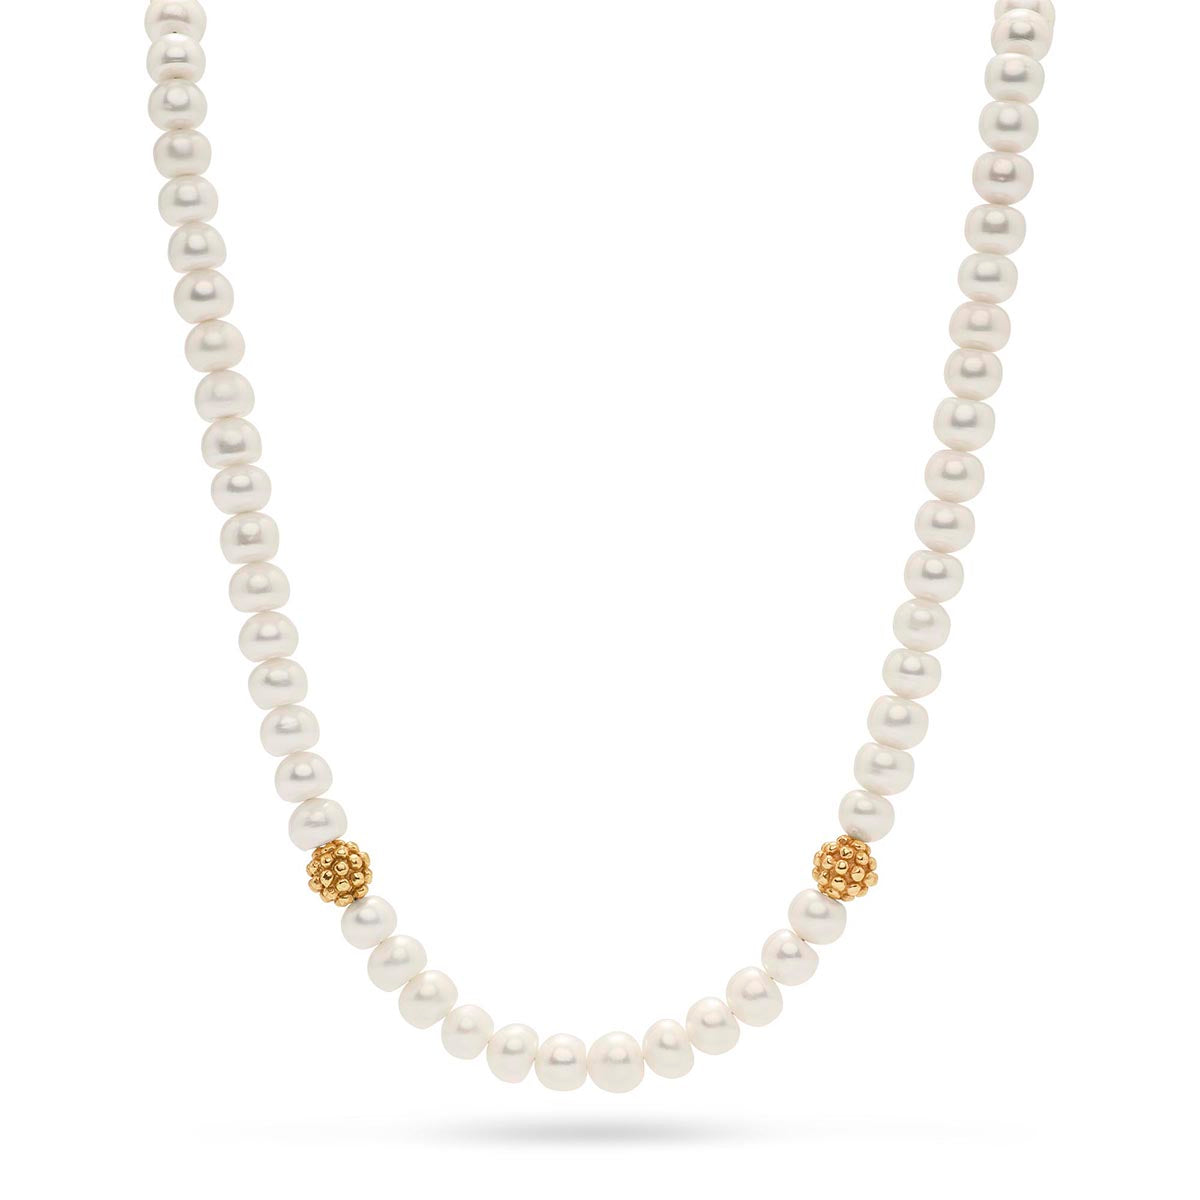 Berry Single Strand Necklace, 16+2" - Pearl